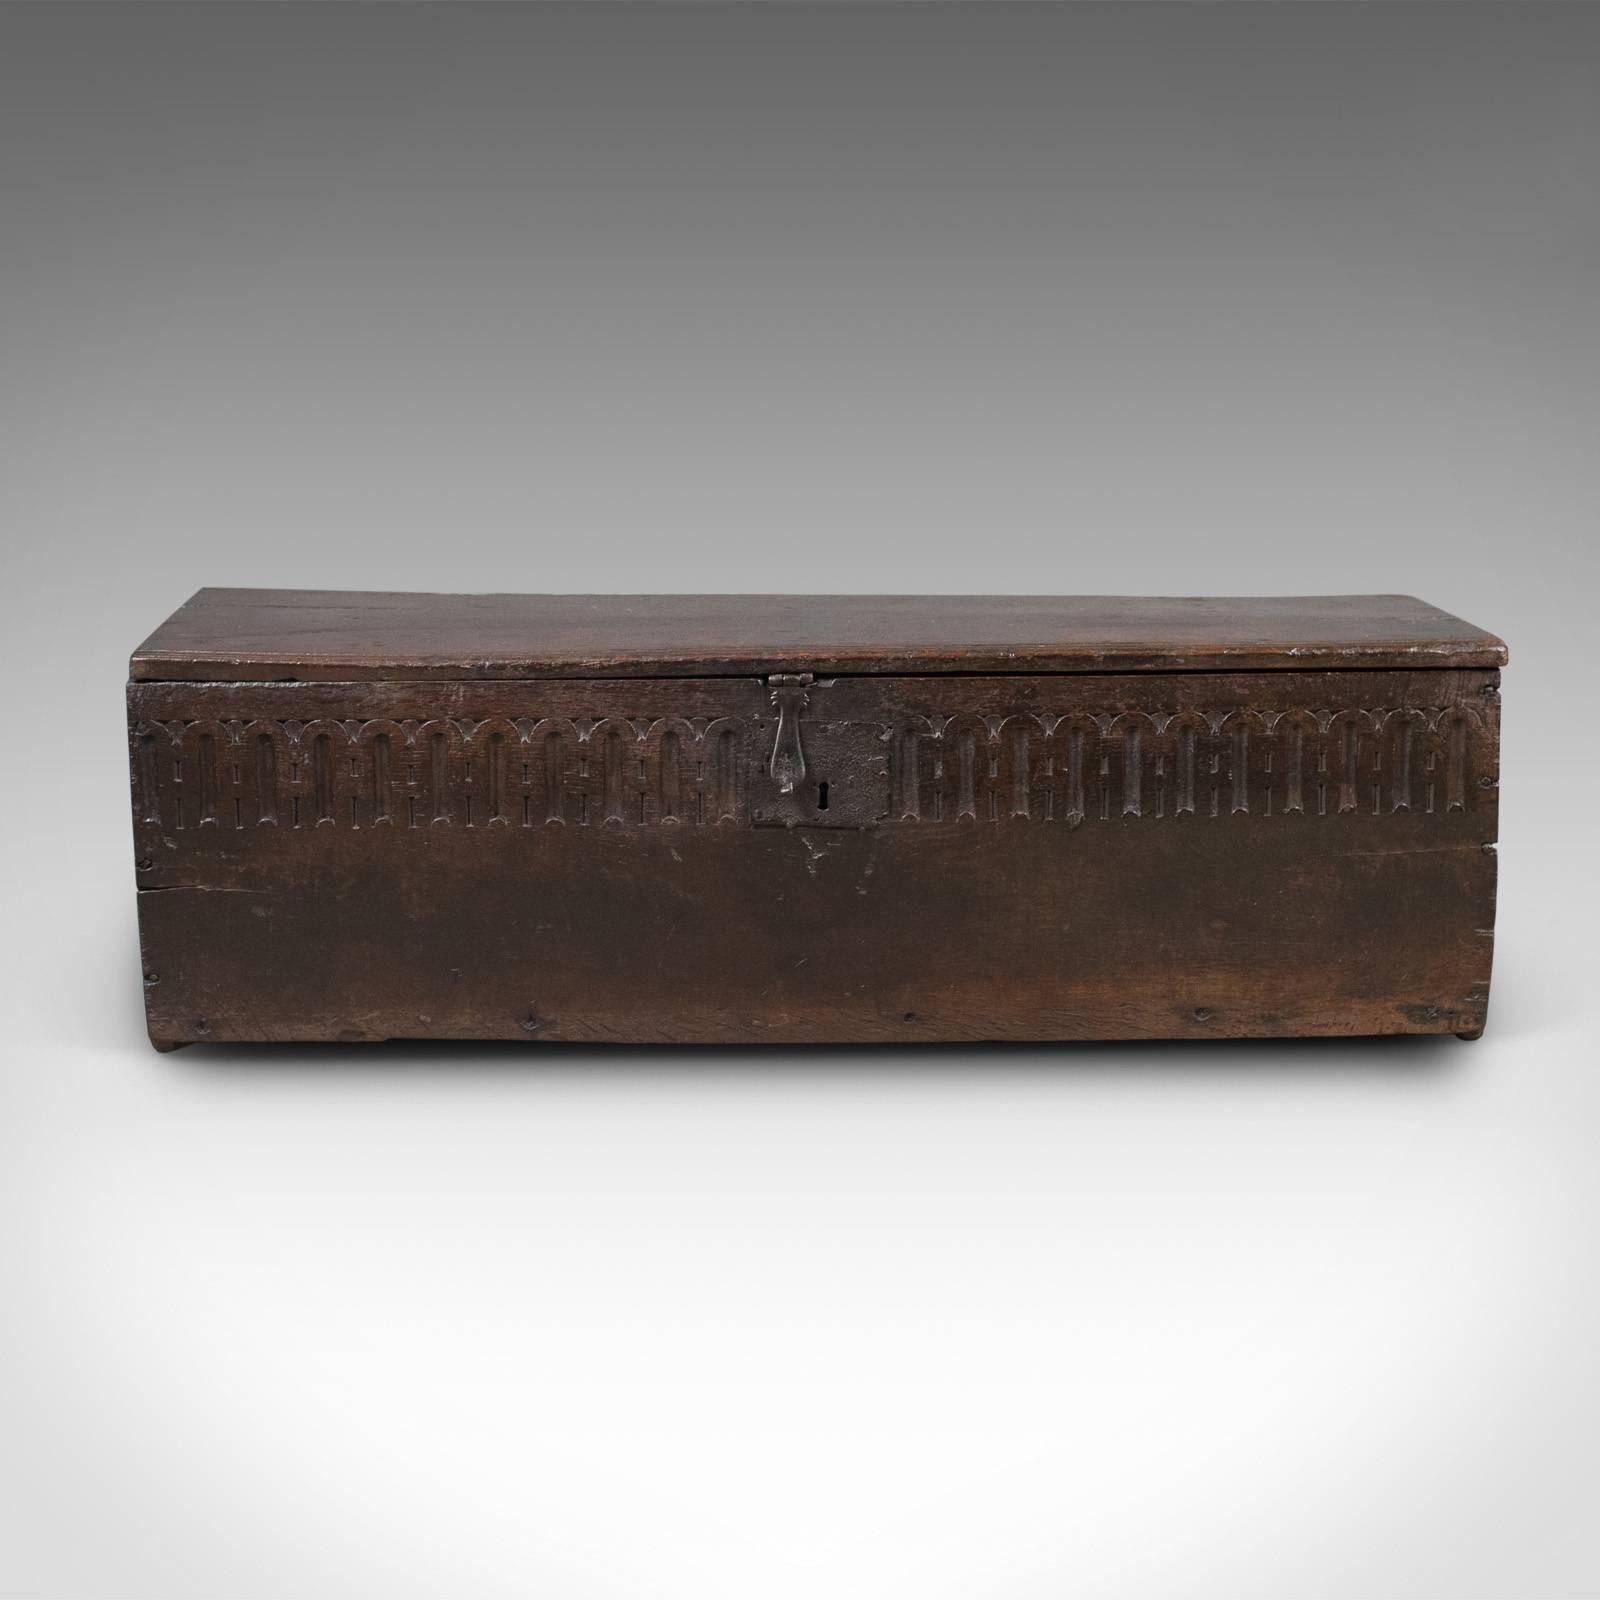 This is an antique coffer in oak, a six plank sword chest. English, dating to the mid-17th century, circa 1660.

Robust six board construction
English oak with desirable aged patina
Front board decorated with colonnade carving

Handcrafted